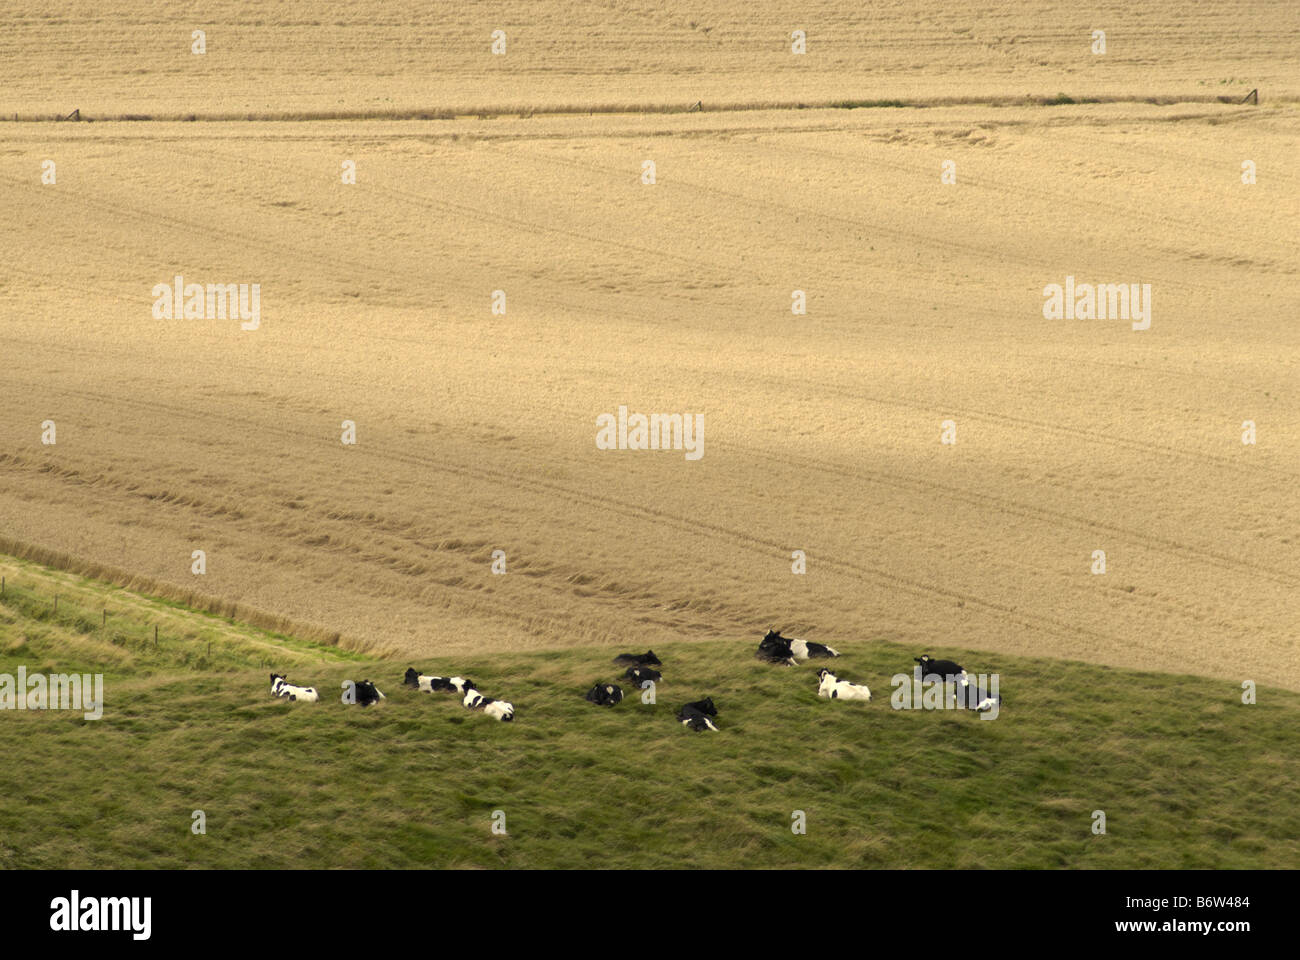 A wheat field at Cherhill viewed from the Lansdowne monument with cattle all sitting in the field. Stock Photo